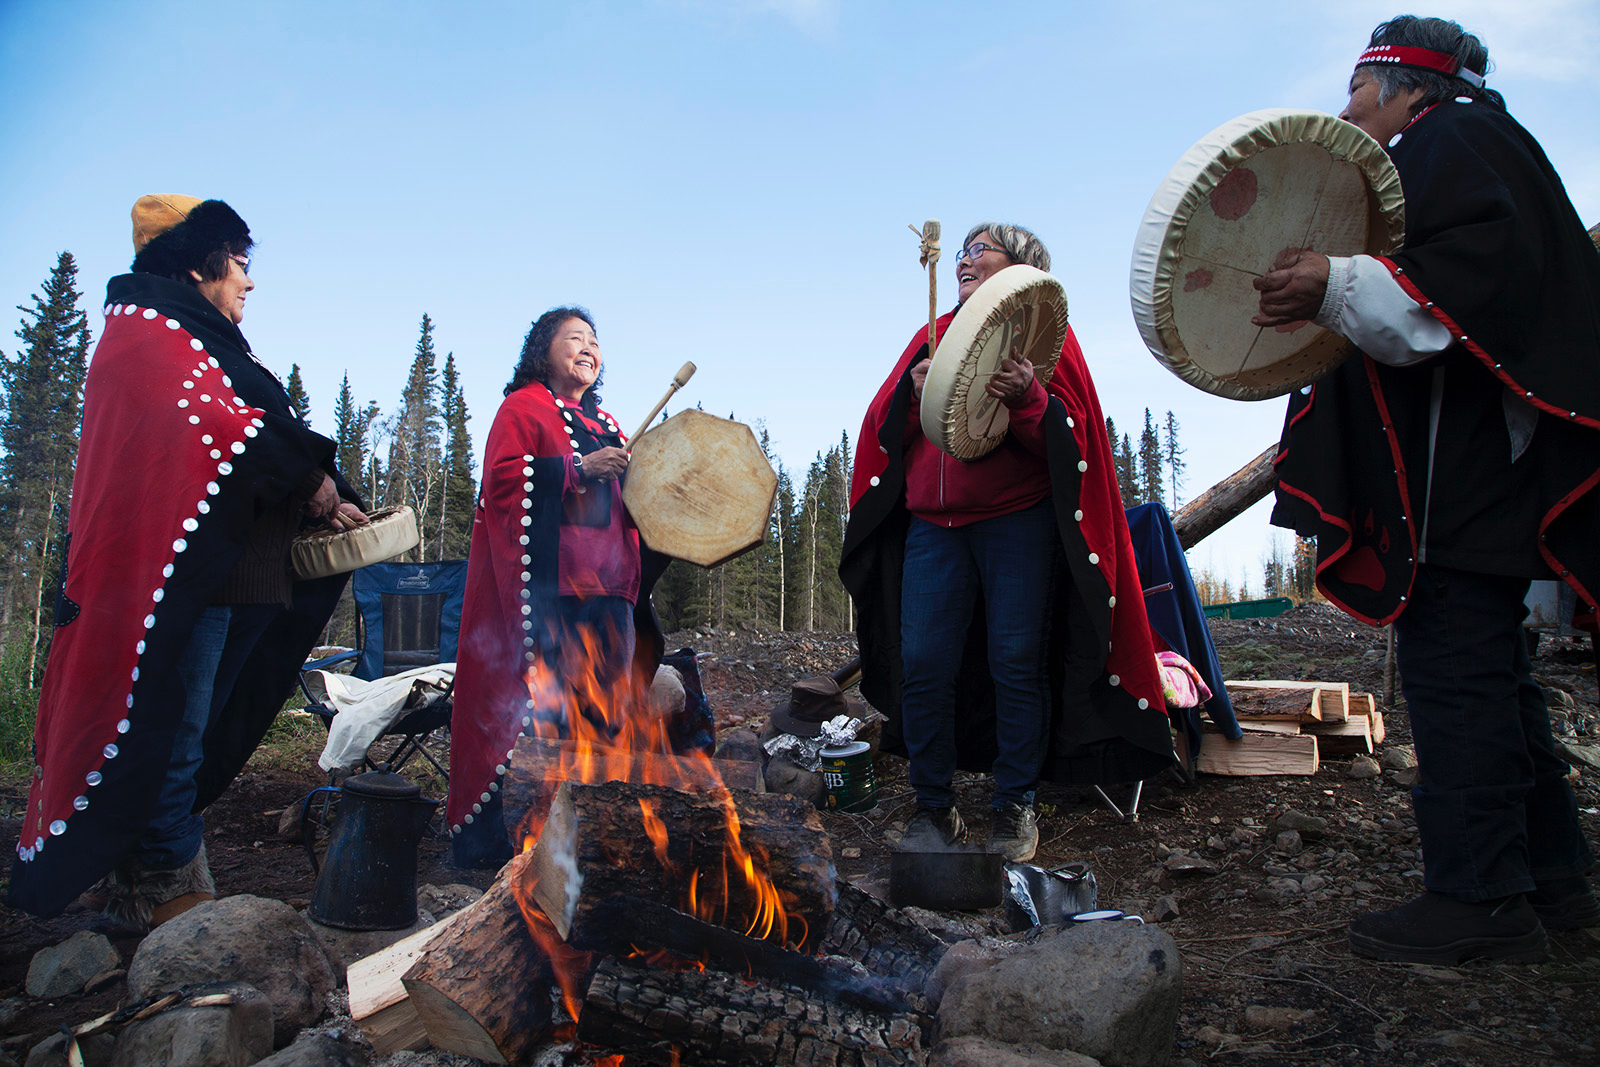 Tahltan’s decades-long struggle to protect Sacred Headwaters